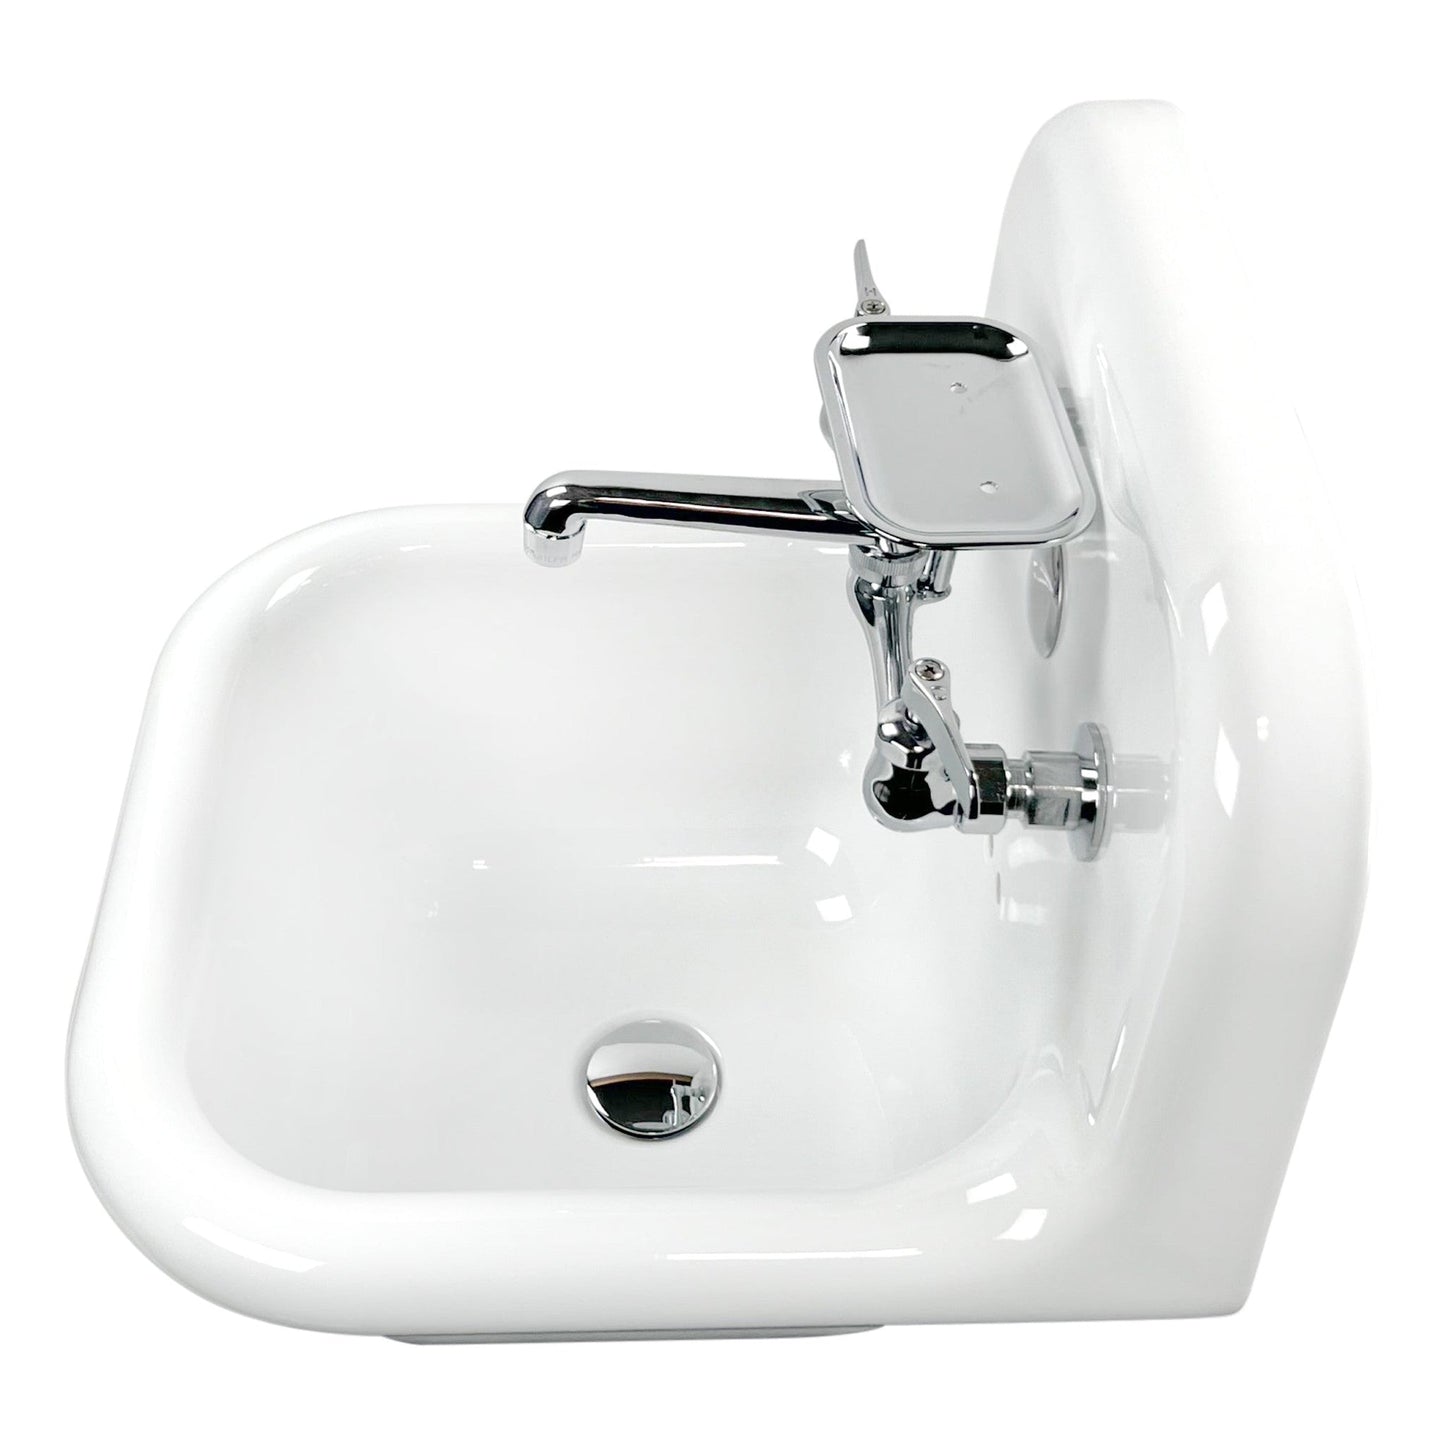 Nantucket Sinks Victorian Collection 17" Irregular Wall-Mounted Glazed White & Matte Black Fireclay Single Bowl Bathroom Sink With Chrome Accessories Set